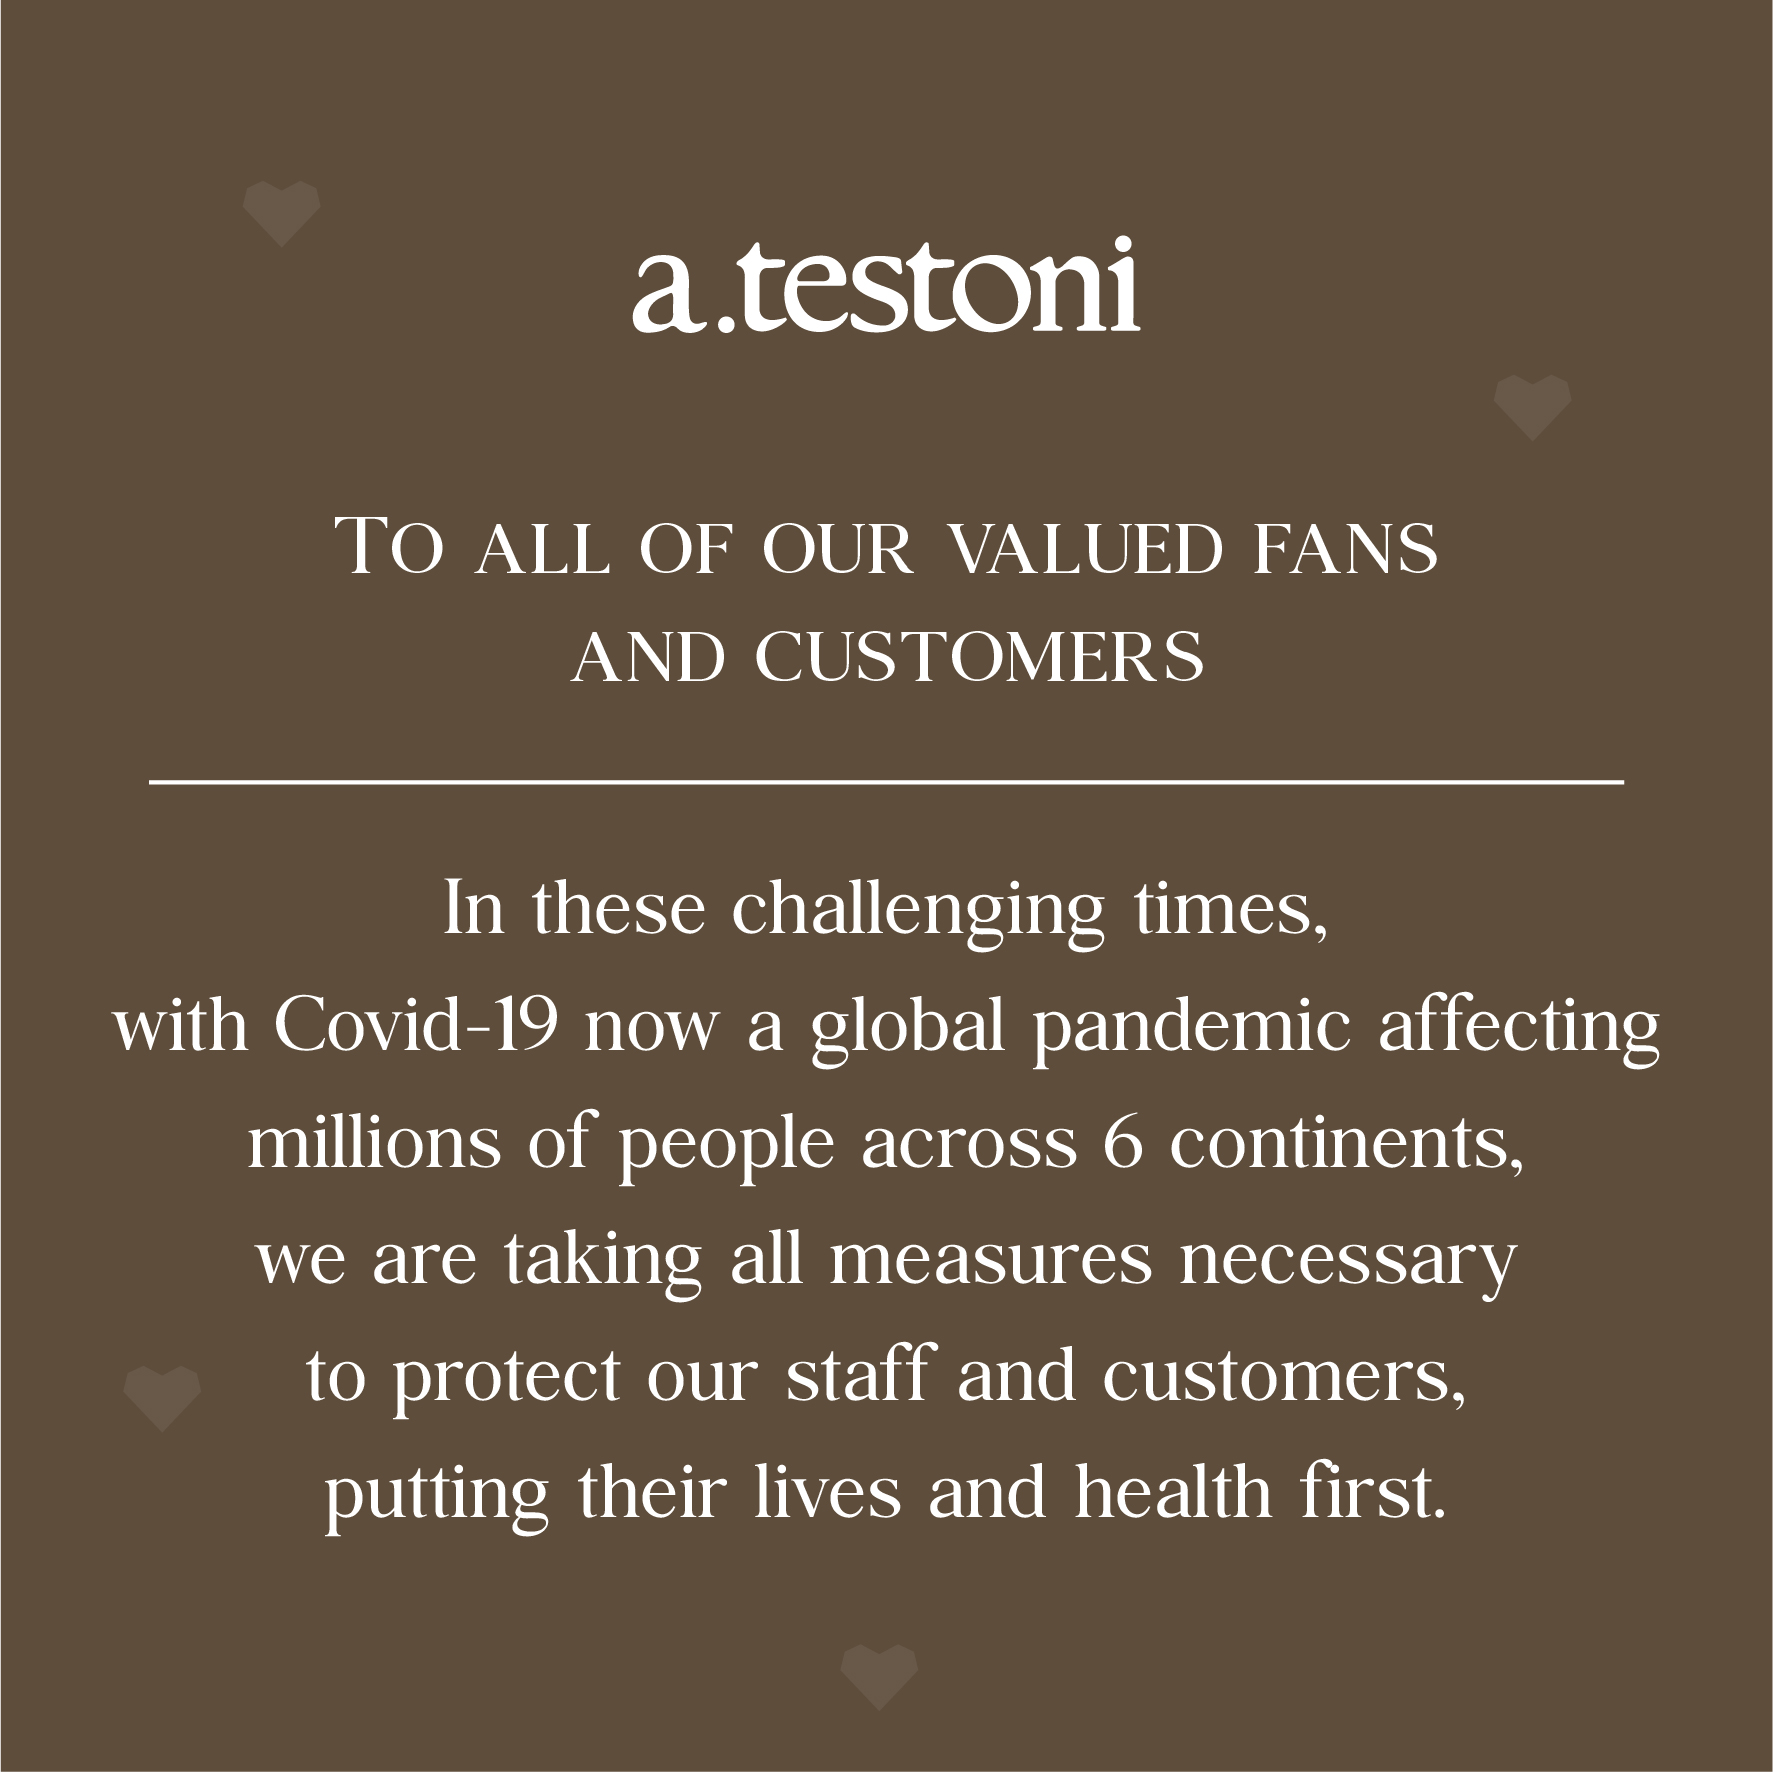 To all of our valued fans and customers